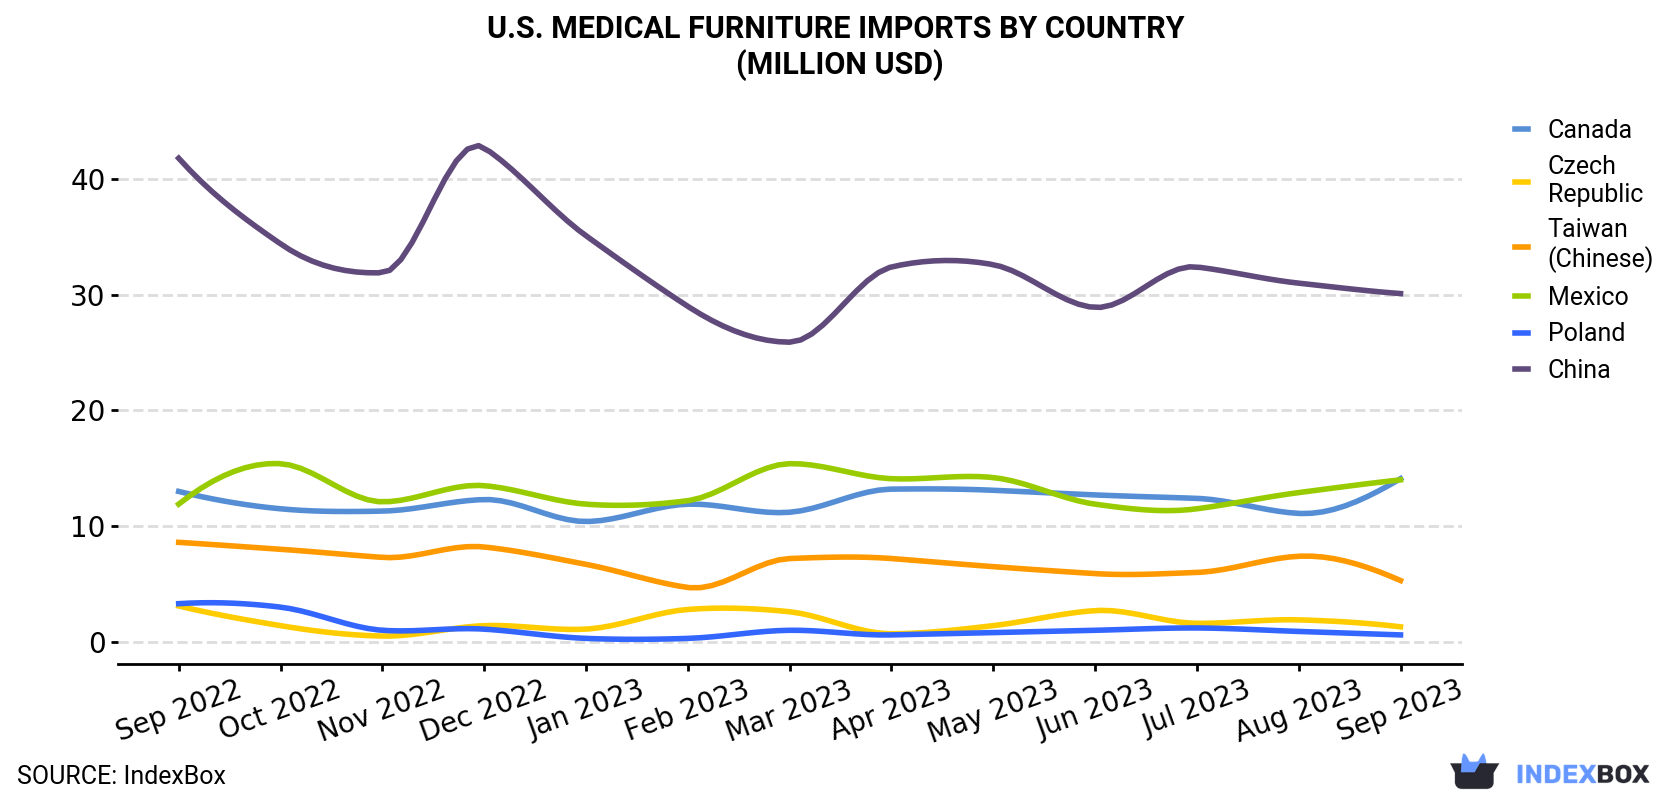 U.S. Medical Furniture Imports By Country (Million USD)